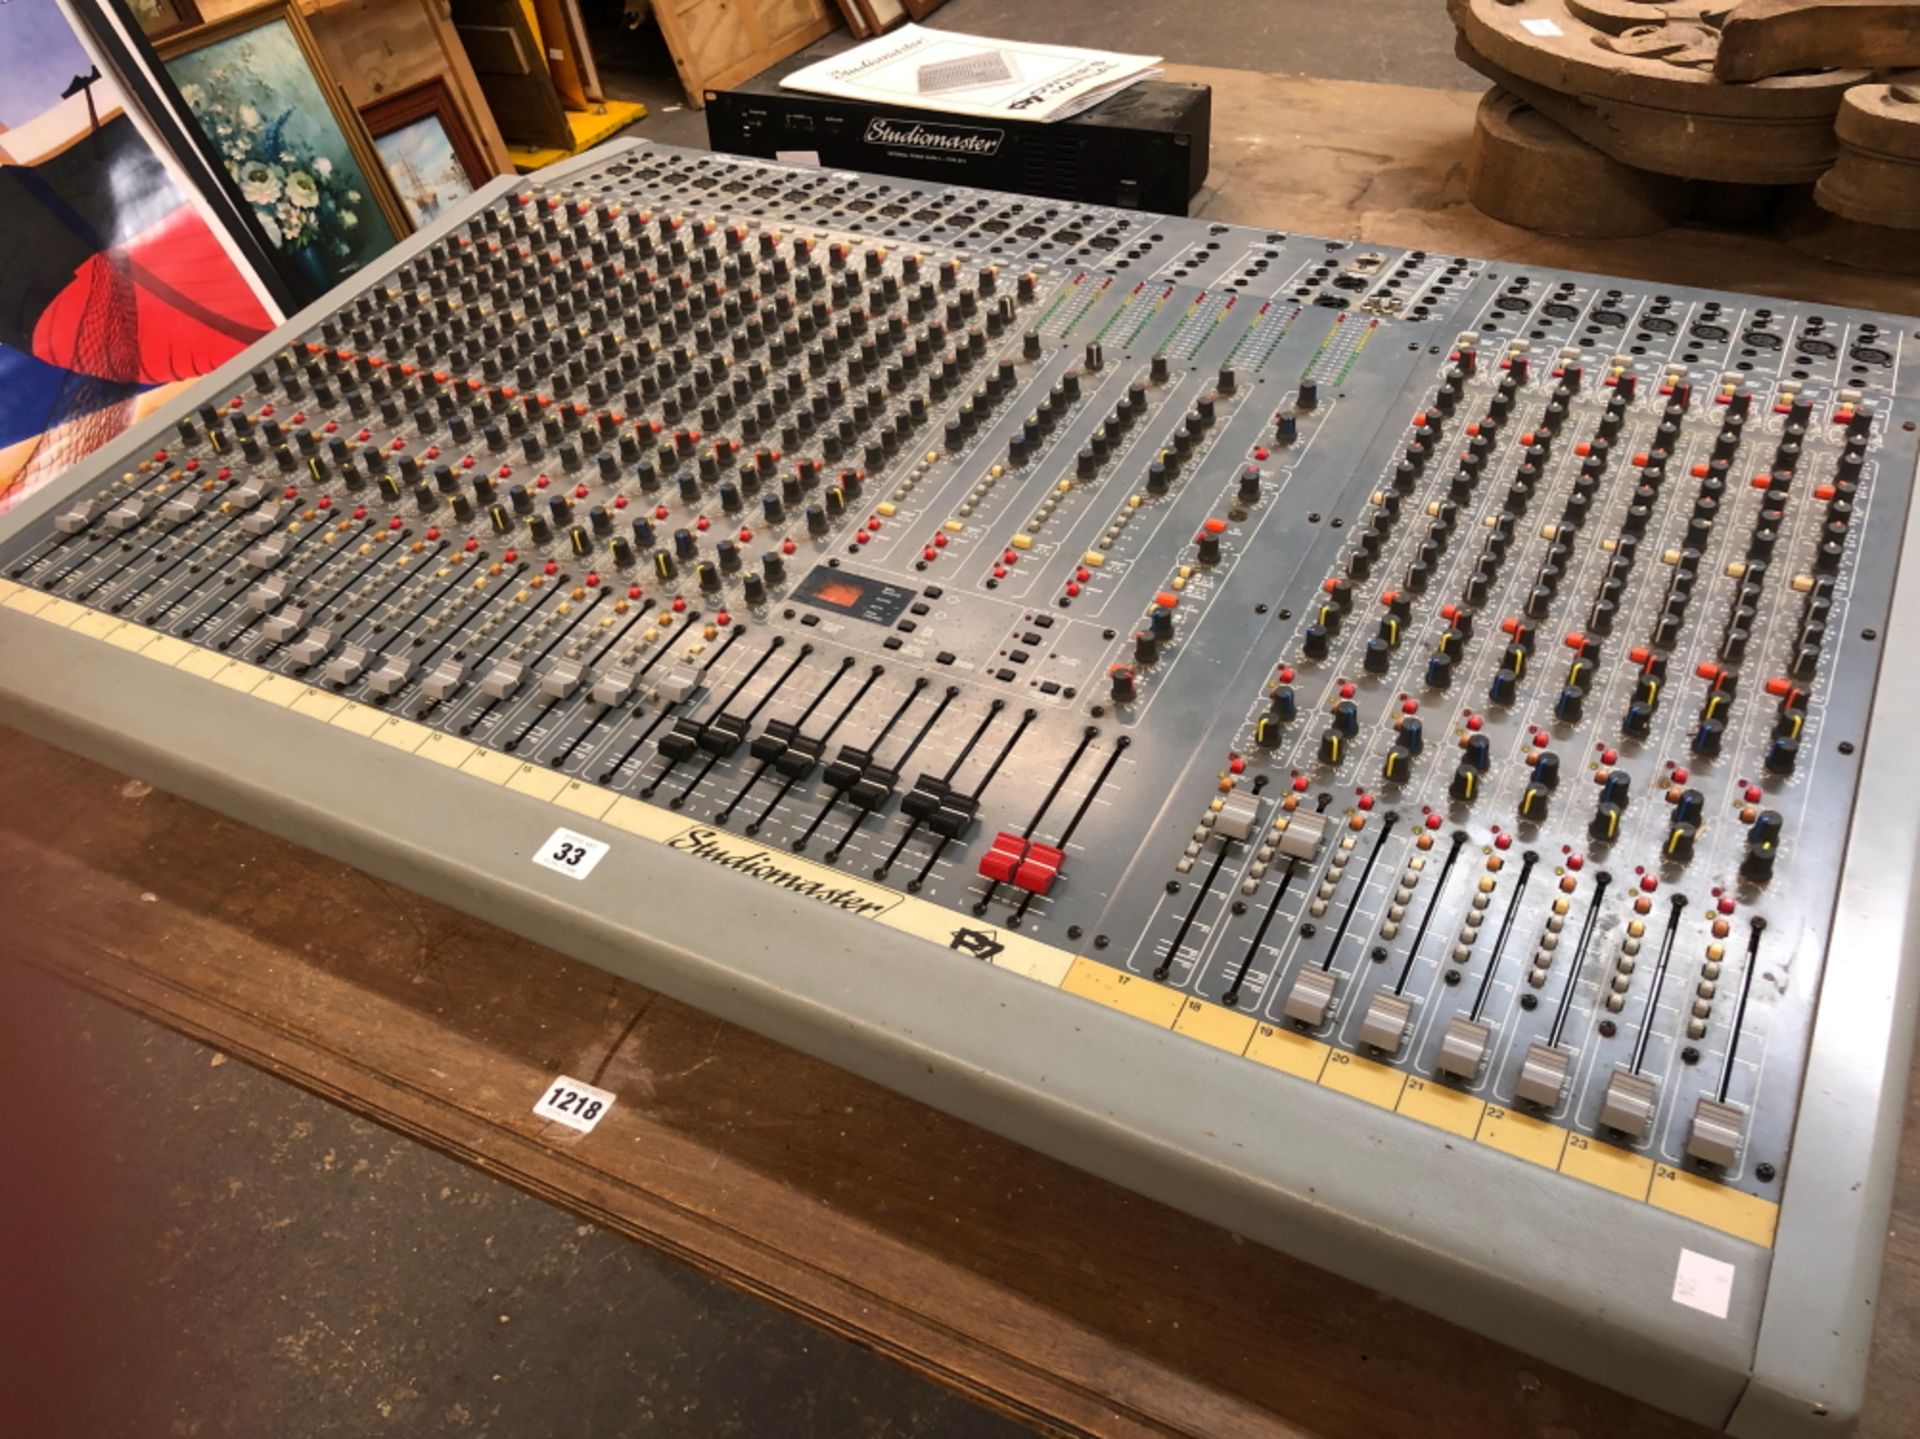 A STUDIO MASTER P7 MULTITRACK MIXING CONSOLE WITH MANUAL AND EXTERNAL POWER SUPPLY UNIT